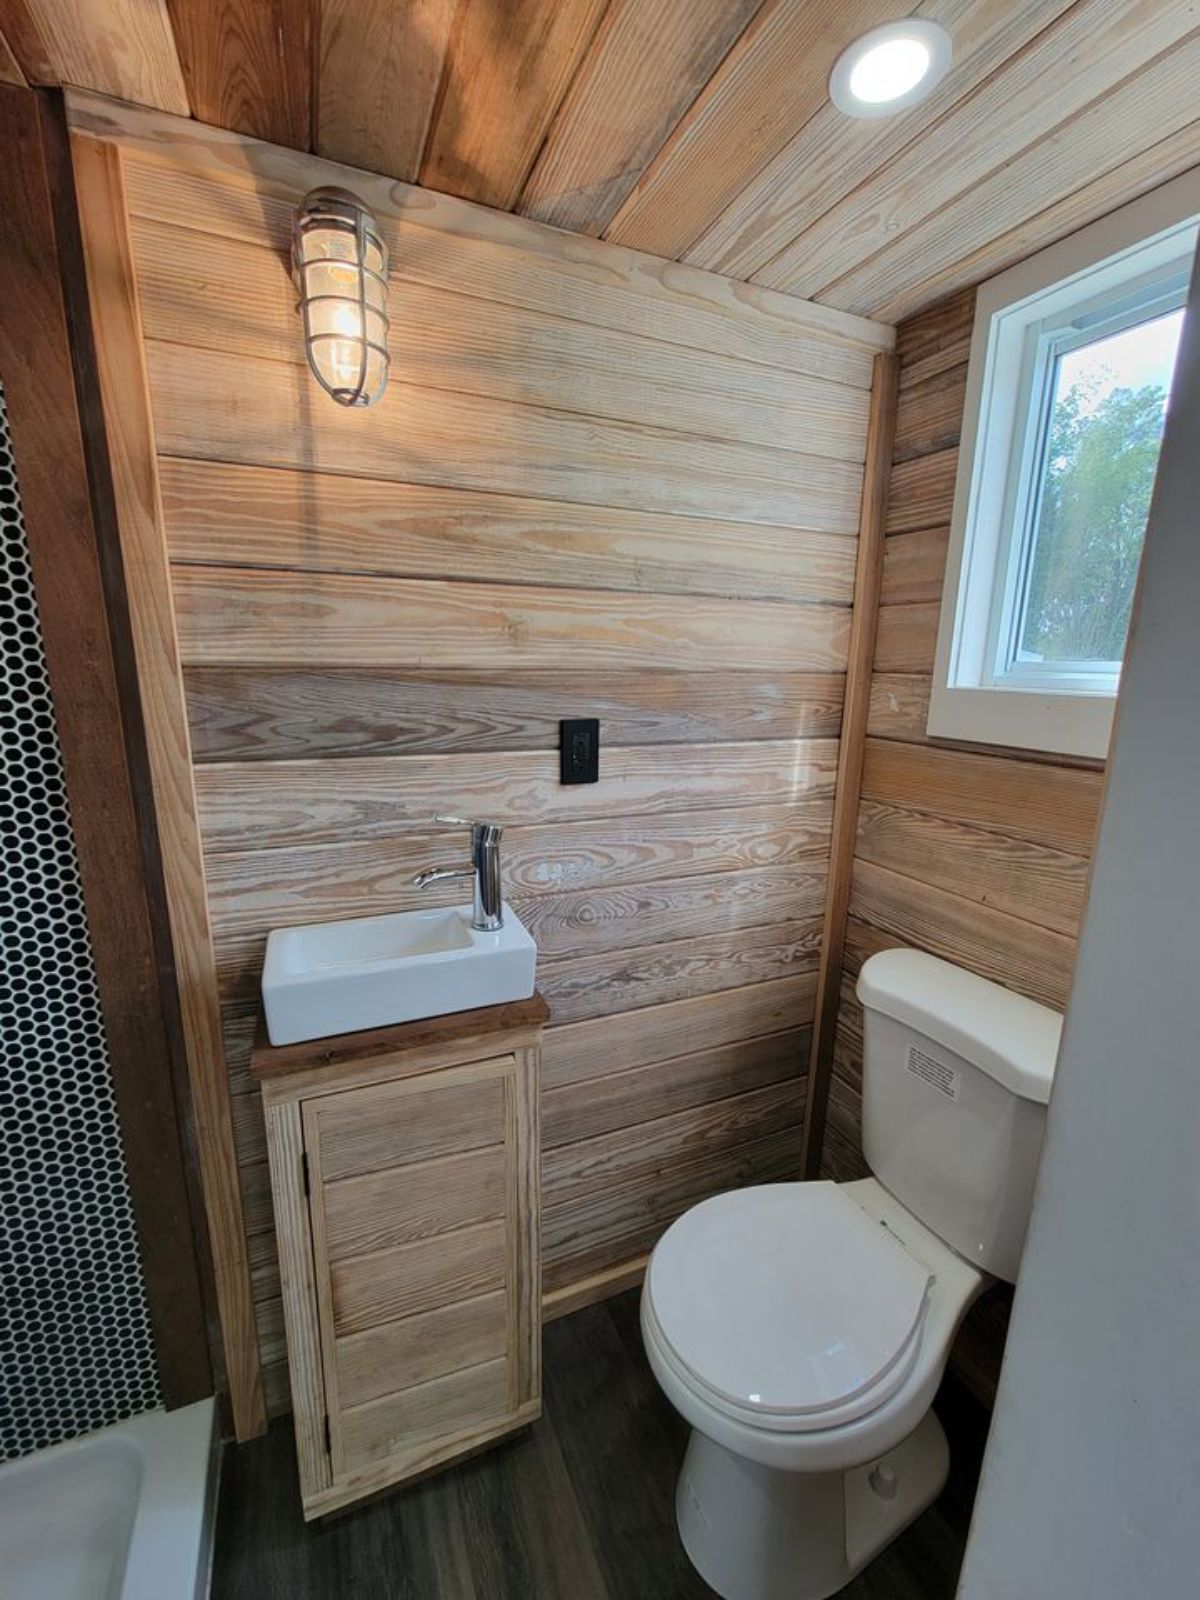 small white sink against wood wall in bathroom